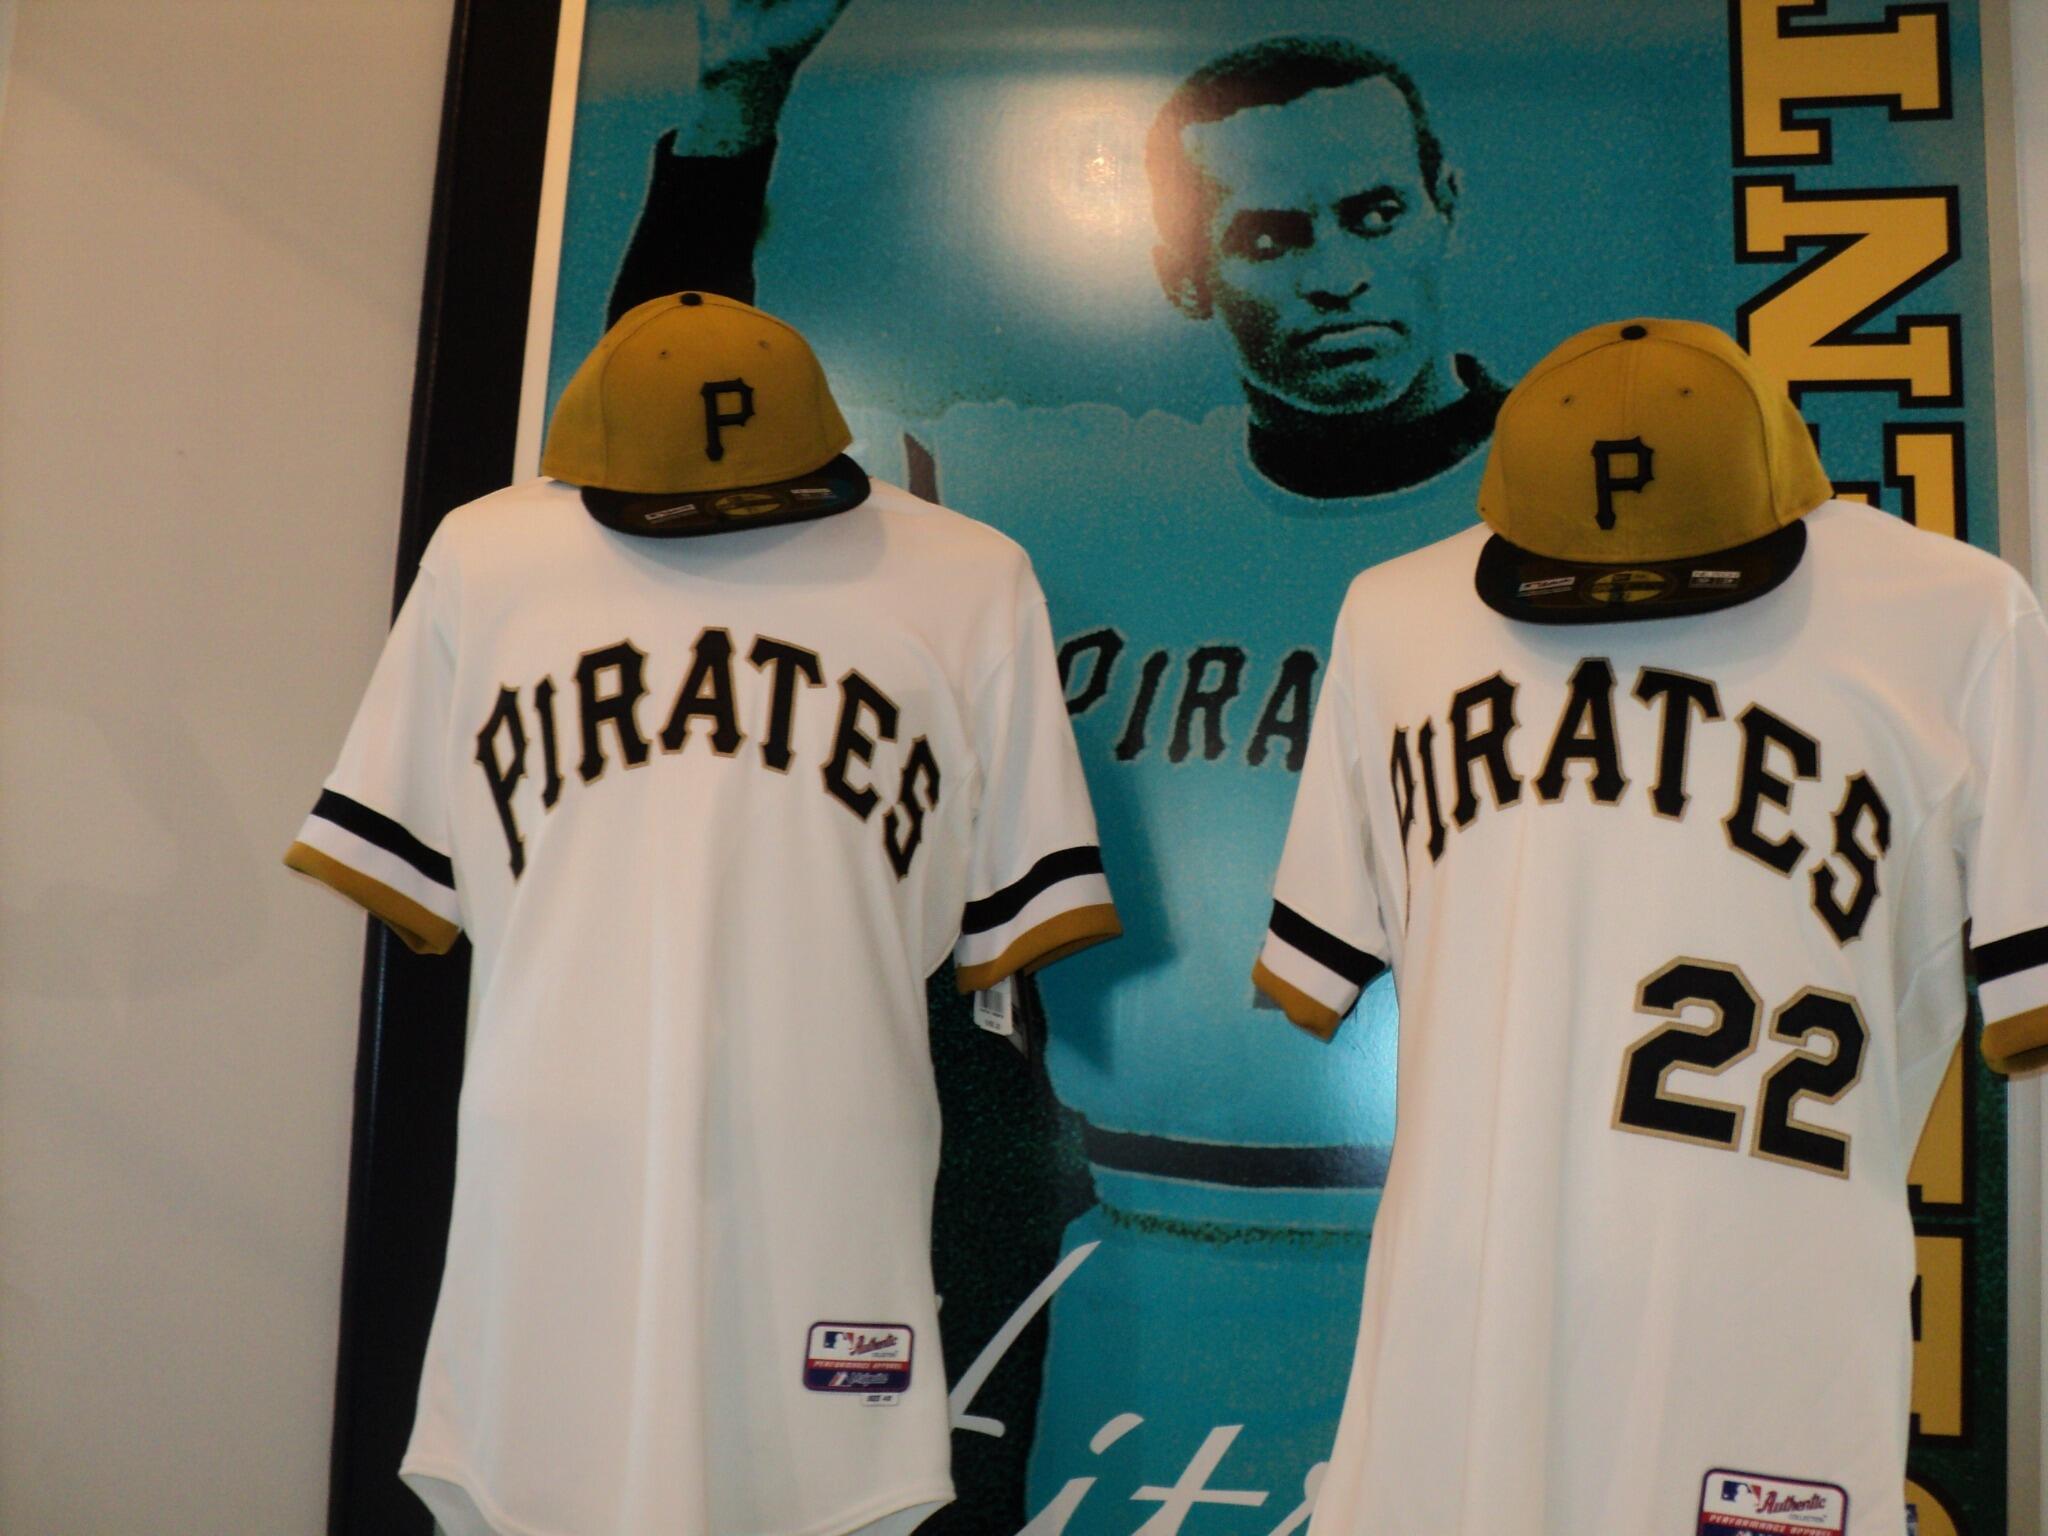 Pittsburgh Pirates on X: Today's the debut of #Pirates alternate uniforms  similar to the early 70's style complete with mustard gold cap.   / X